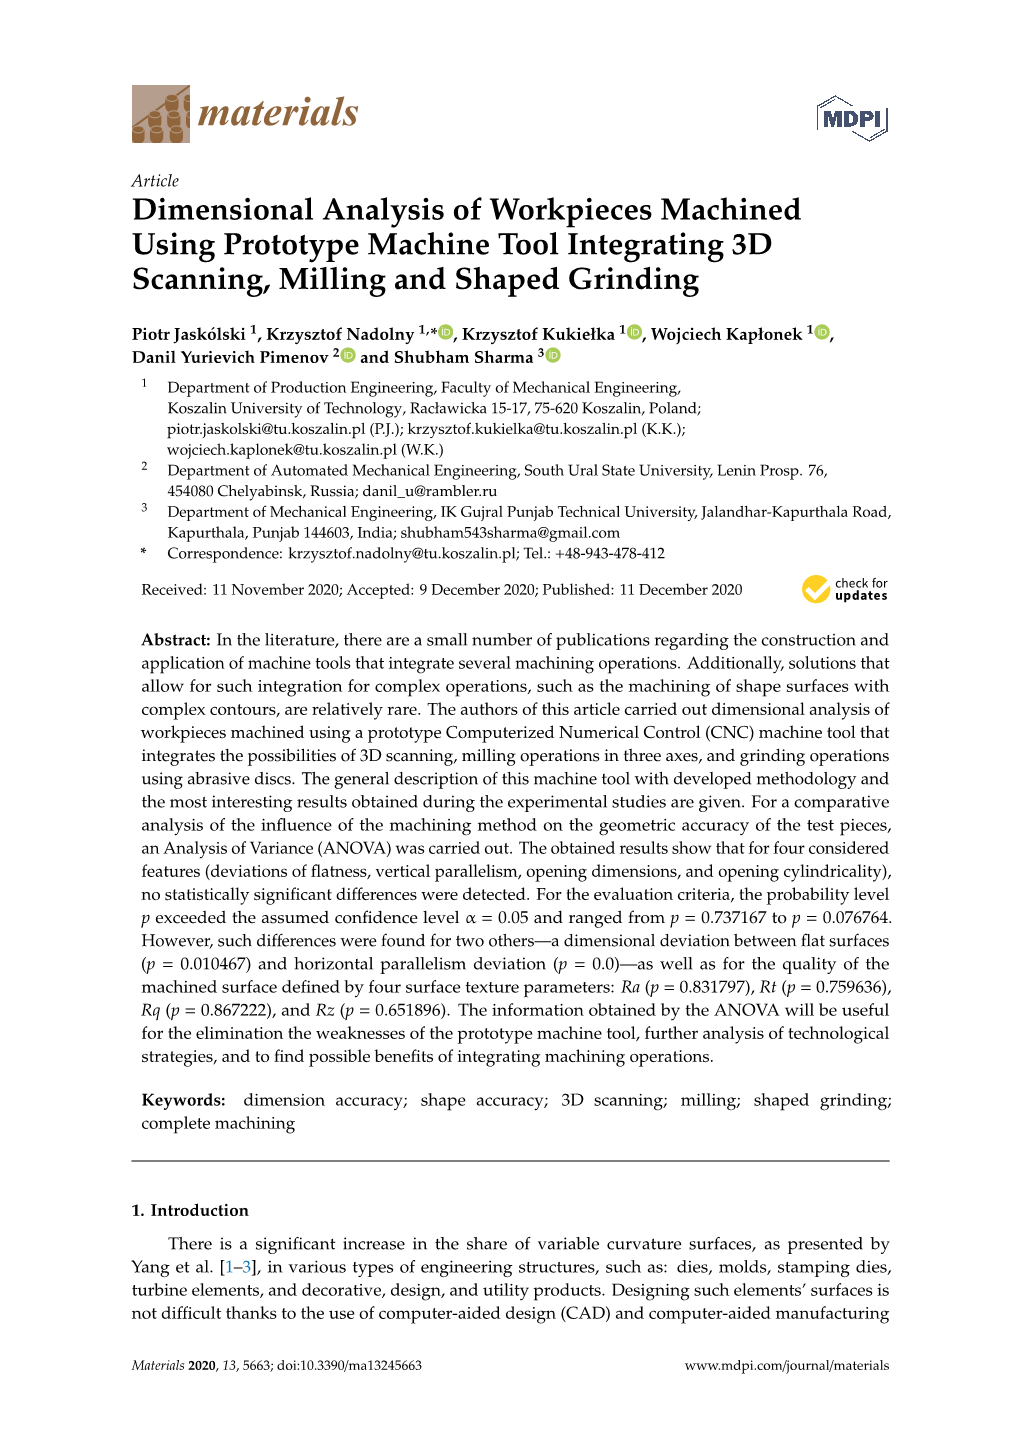 Dimensional Analysis of Workpieces Machined Using Prototype Machine Tool Integrating 3D Scanning, Milling and Shaped Grinding